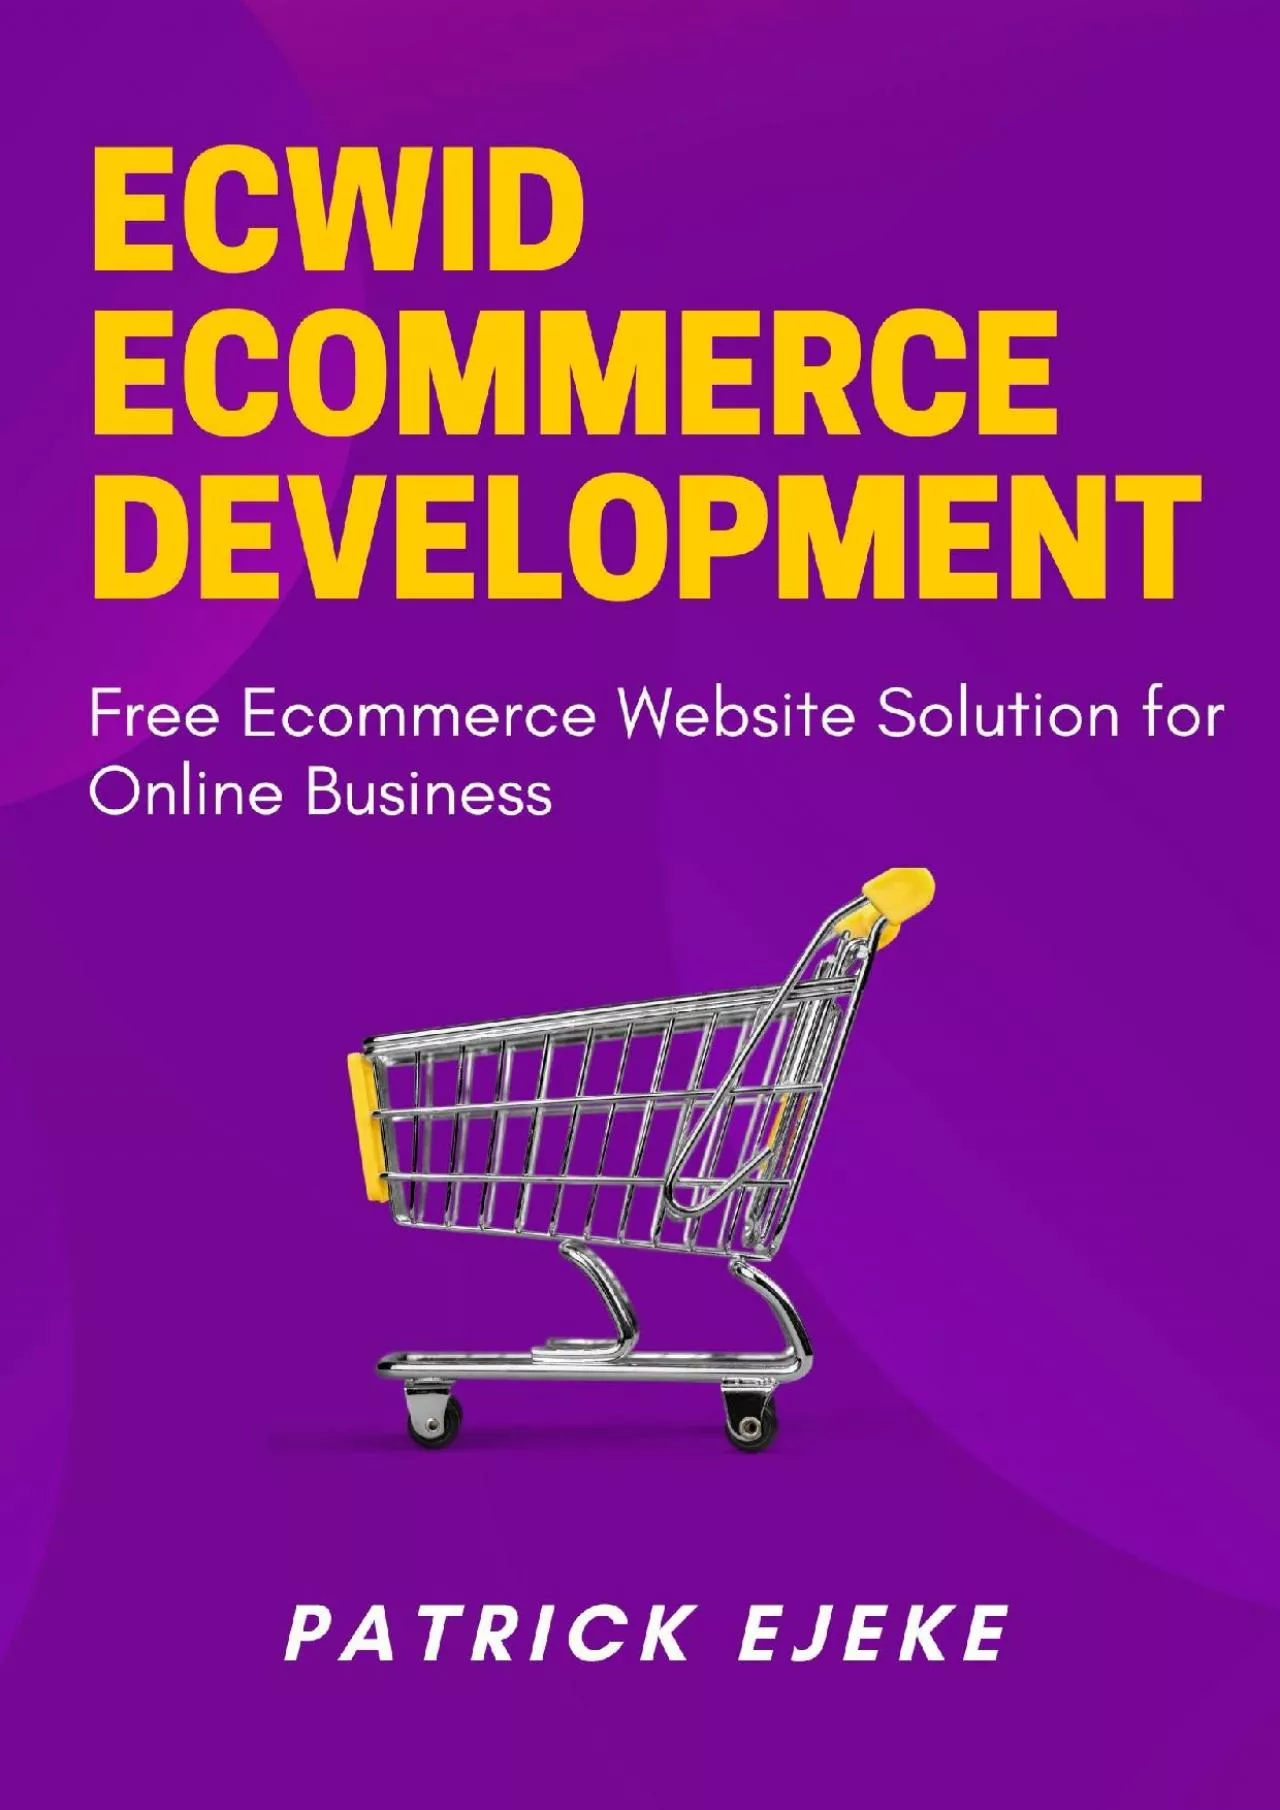 (EBOOK)-Ecwid Ecommerce Development: How To Create an Ecommerce Online Store with Ecwid